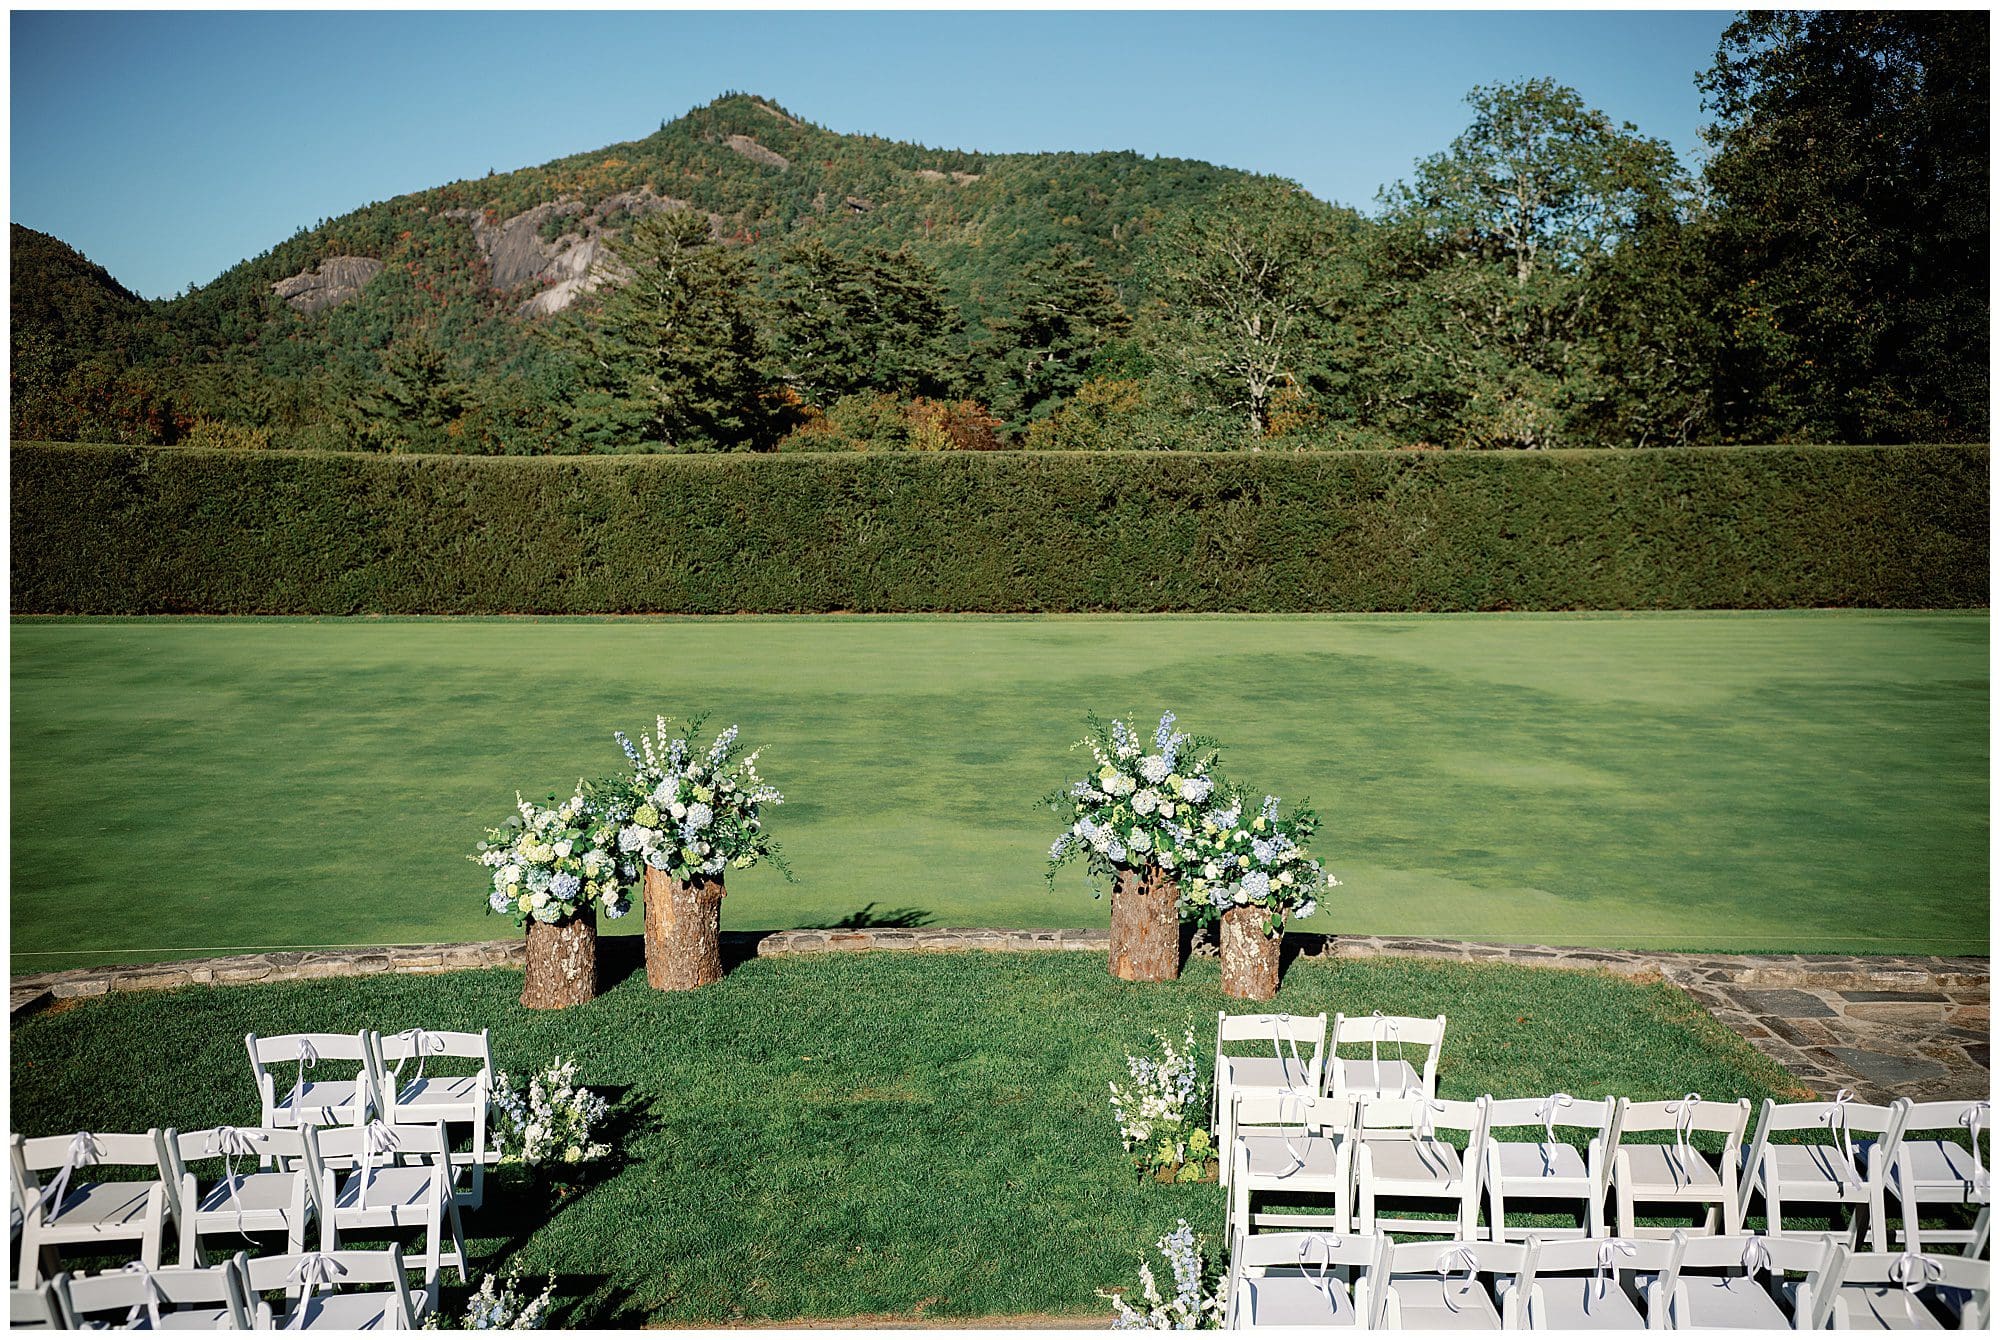 A wedding ceremony set up in a grassy area with mountains in the background.